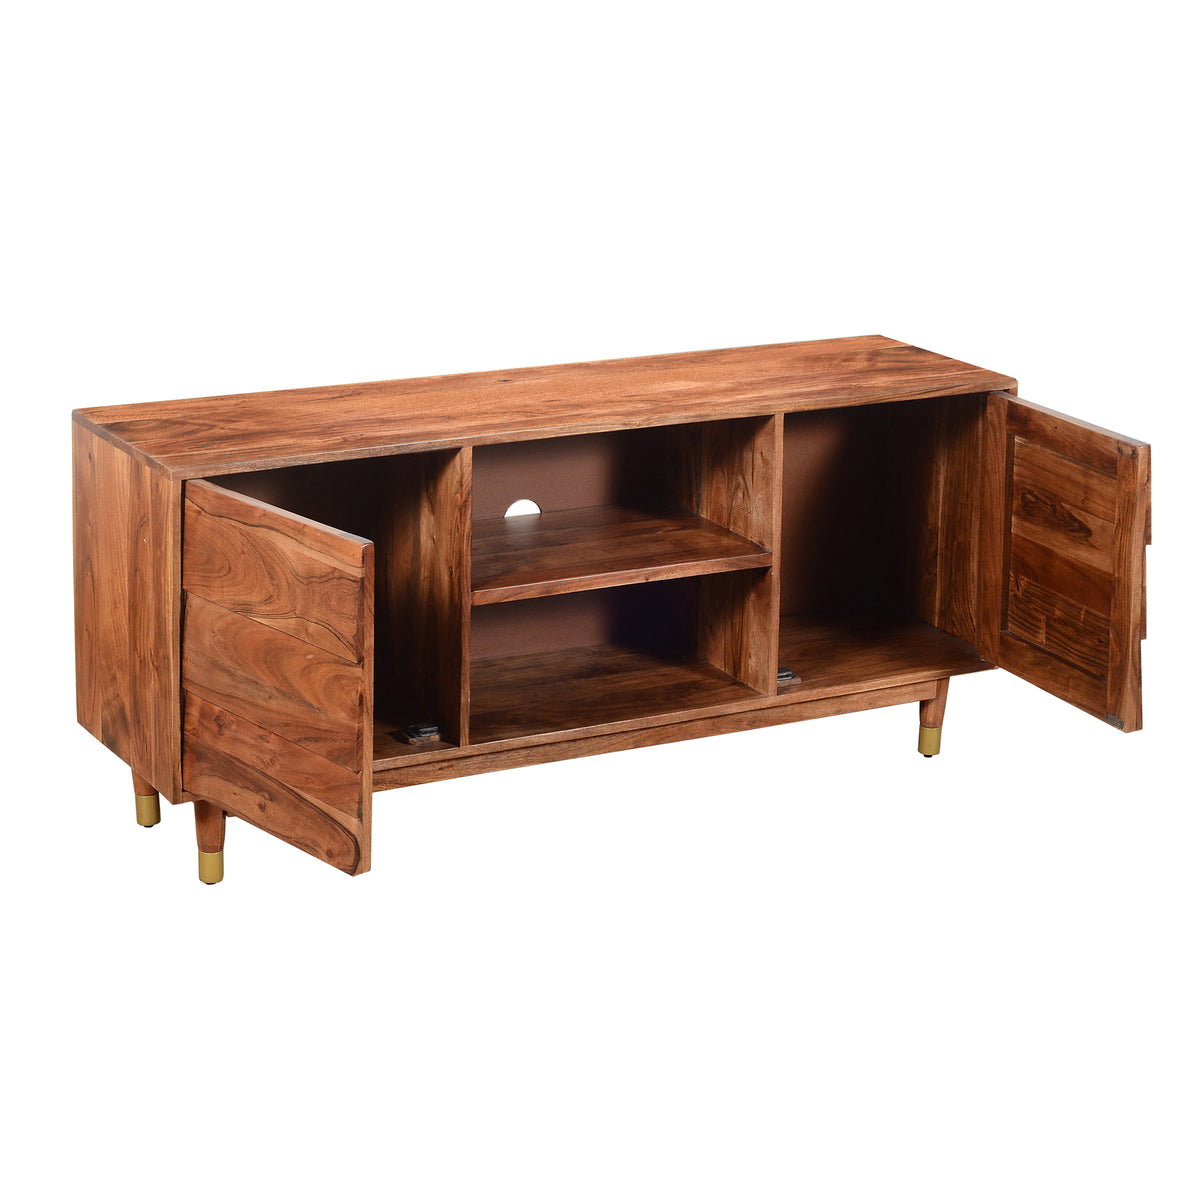 Handcrafted Wooden TV Console with Live Edge Shutter Door Cabinets, Brown - UPT-197866